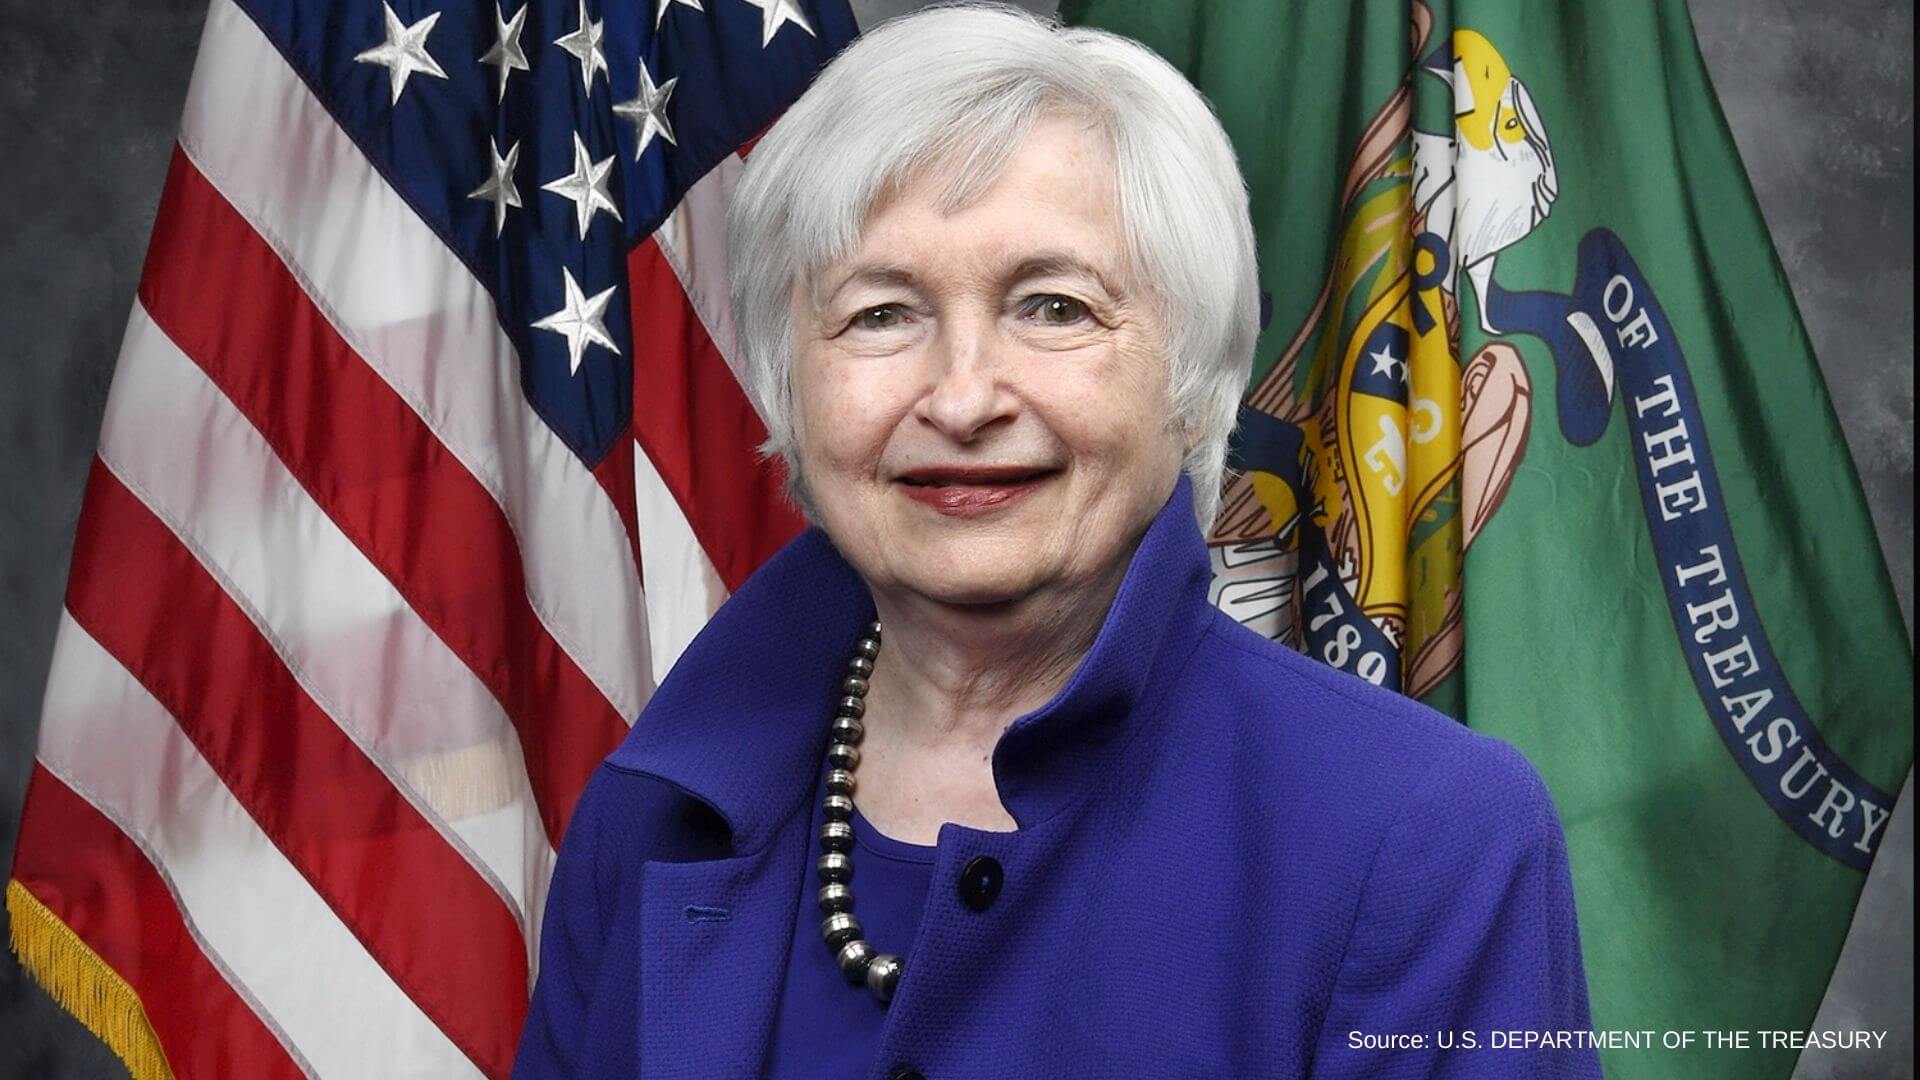 Yellen Expresses Confidence in Financial System While Warning of Risk of Continued Volatility